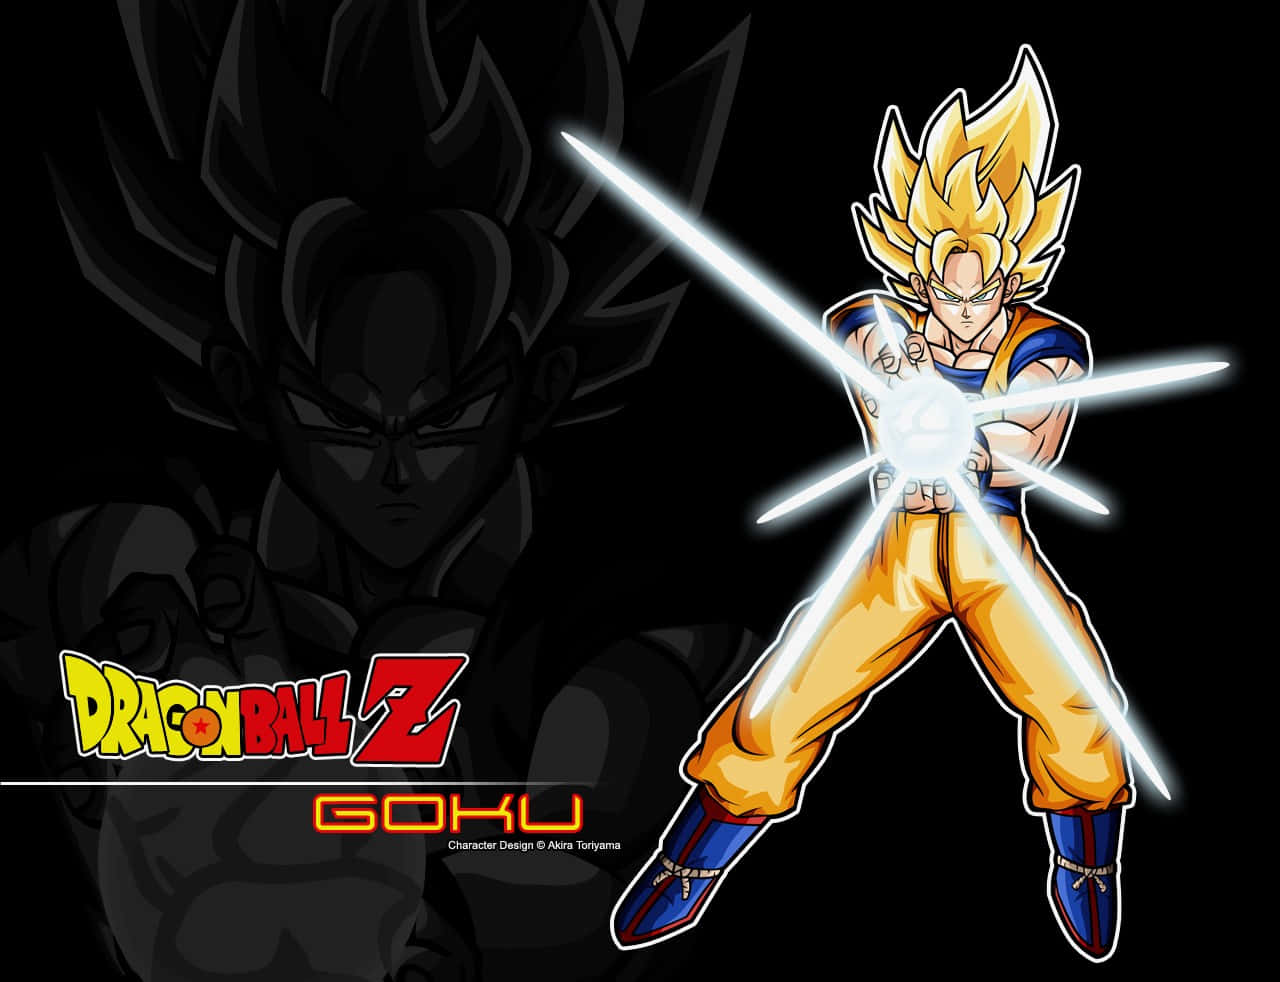 Experience the power of a Super Saiyan! Wallpaper